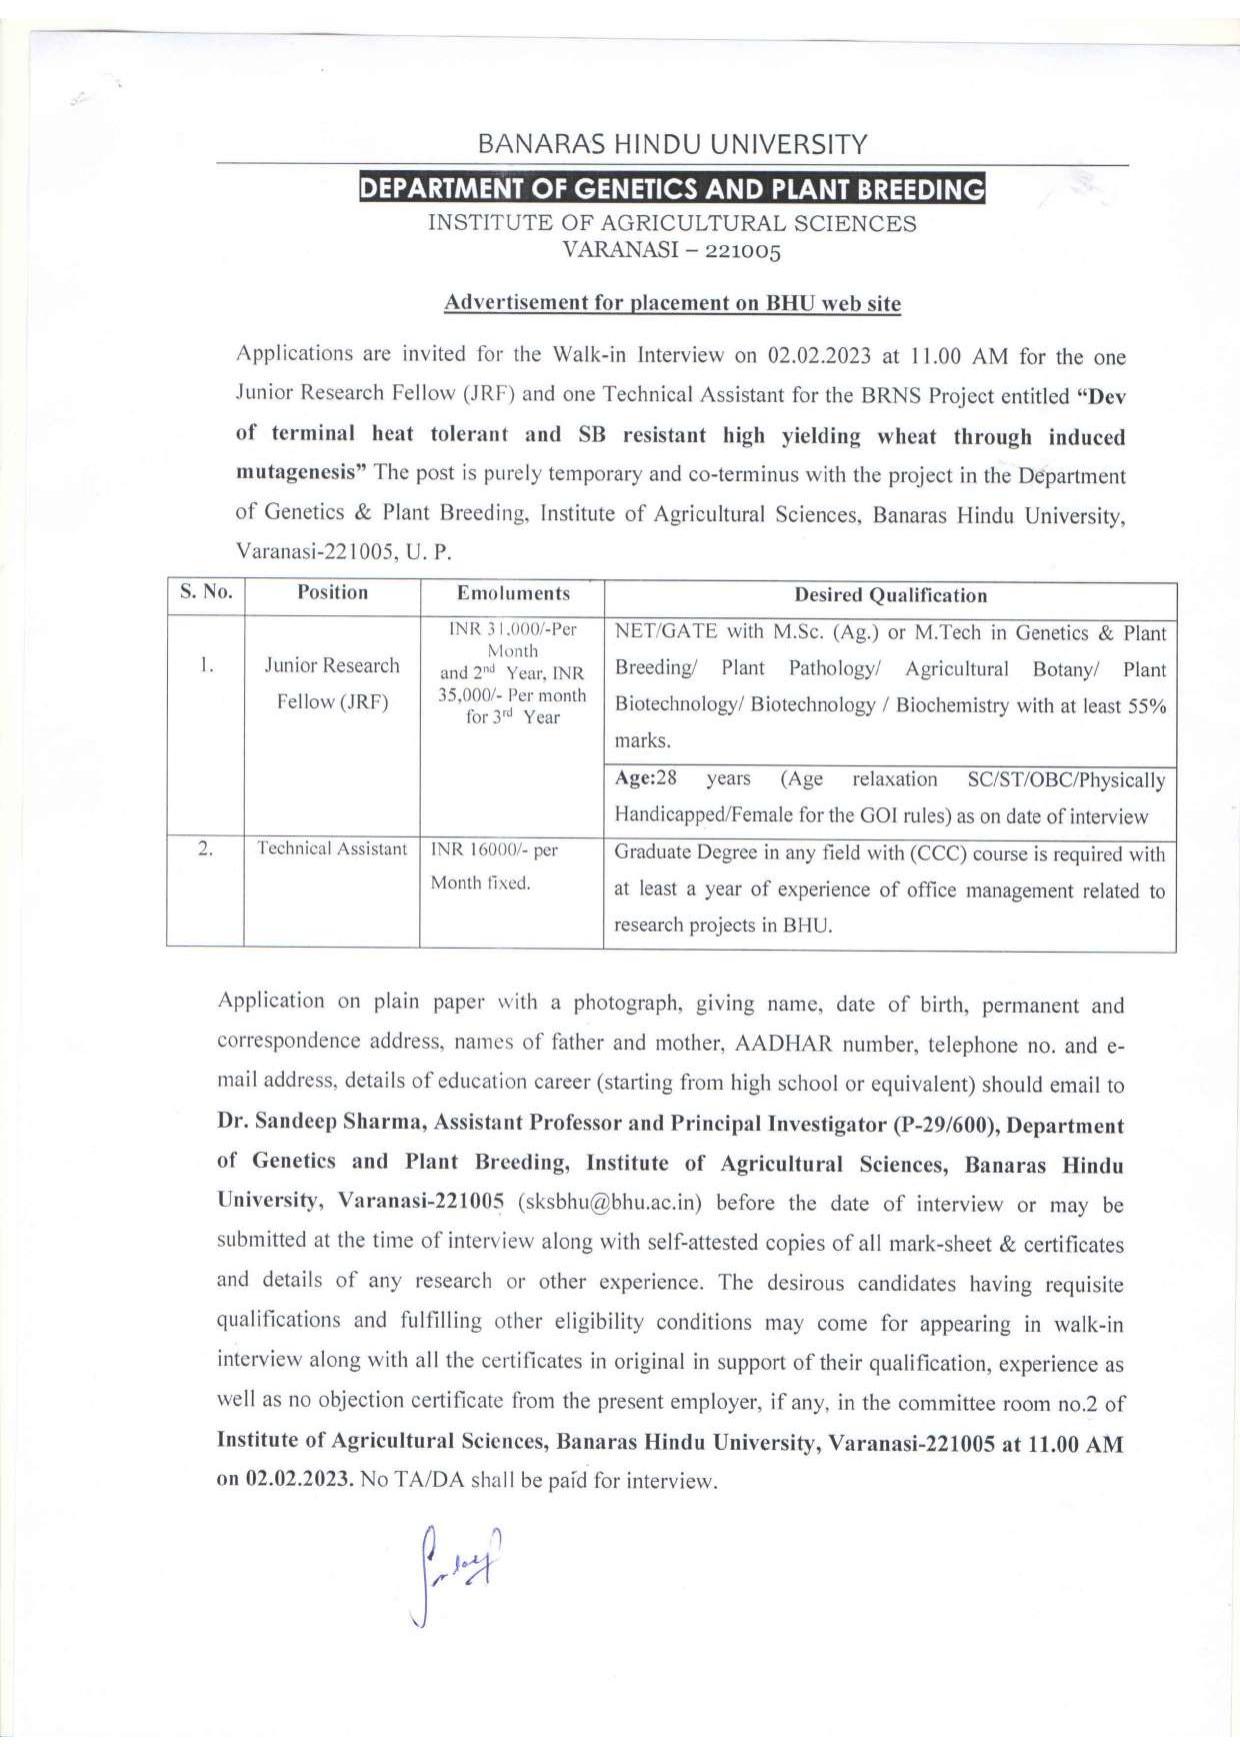 Banaras Hindu University Invites Application for Junior Research Fellow, Technical Assistant Recruitment 2023 - Page 1